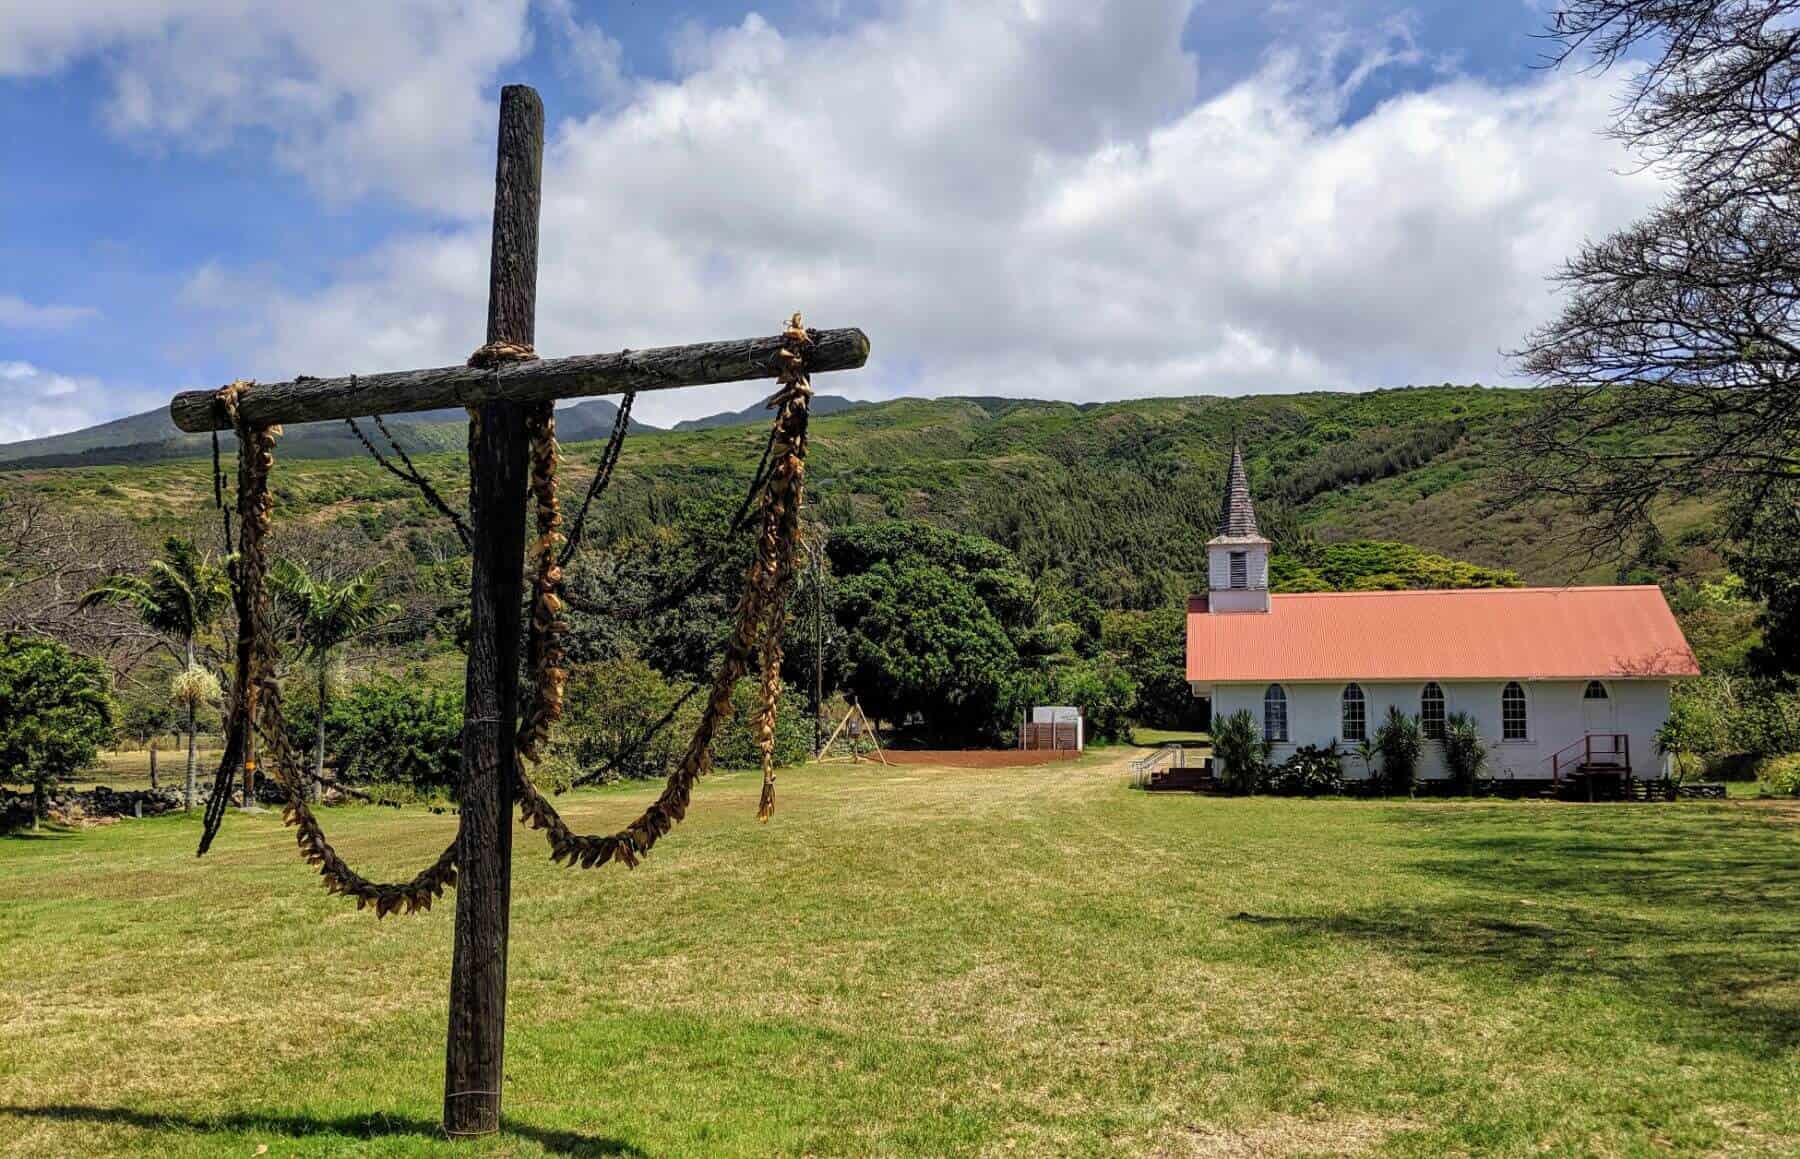 large wooden cross with leis and red and white Church in backgound